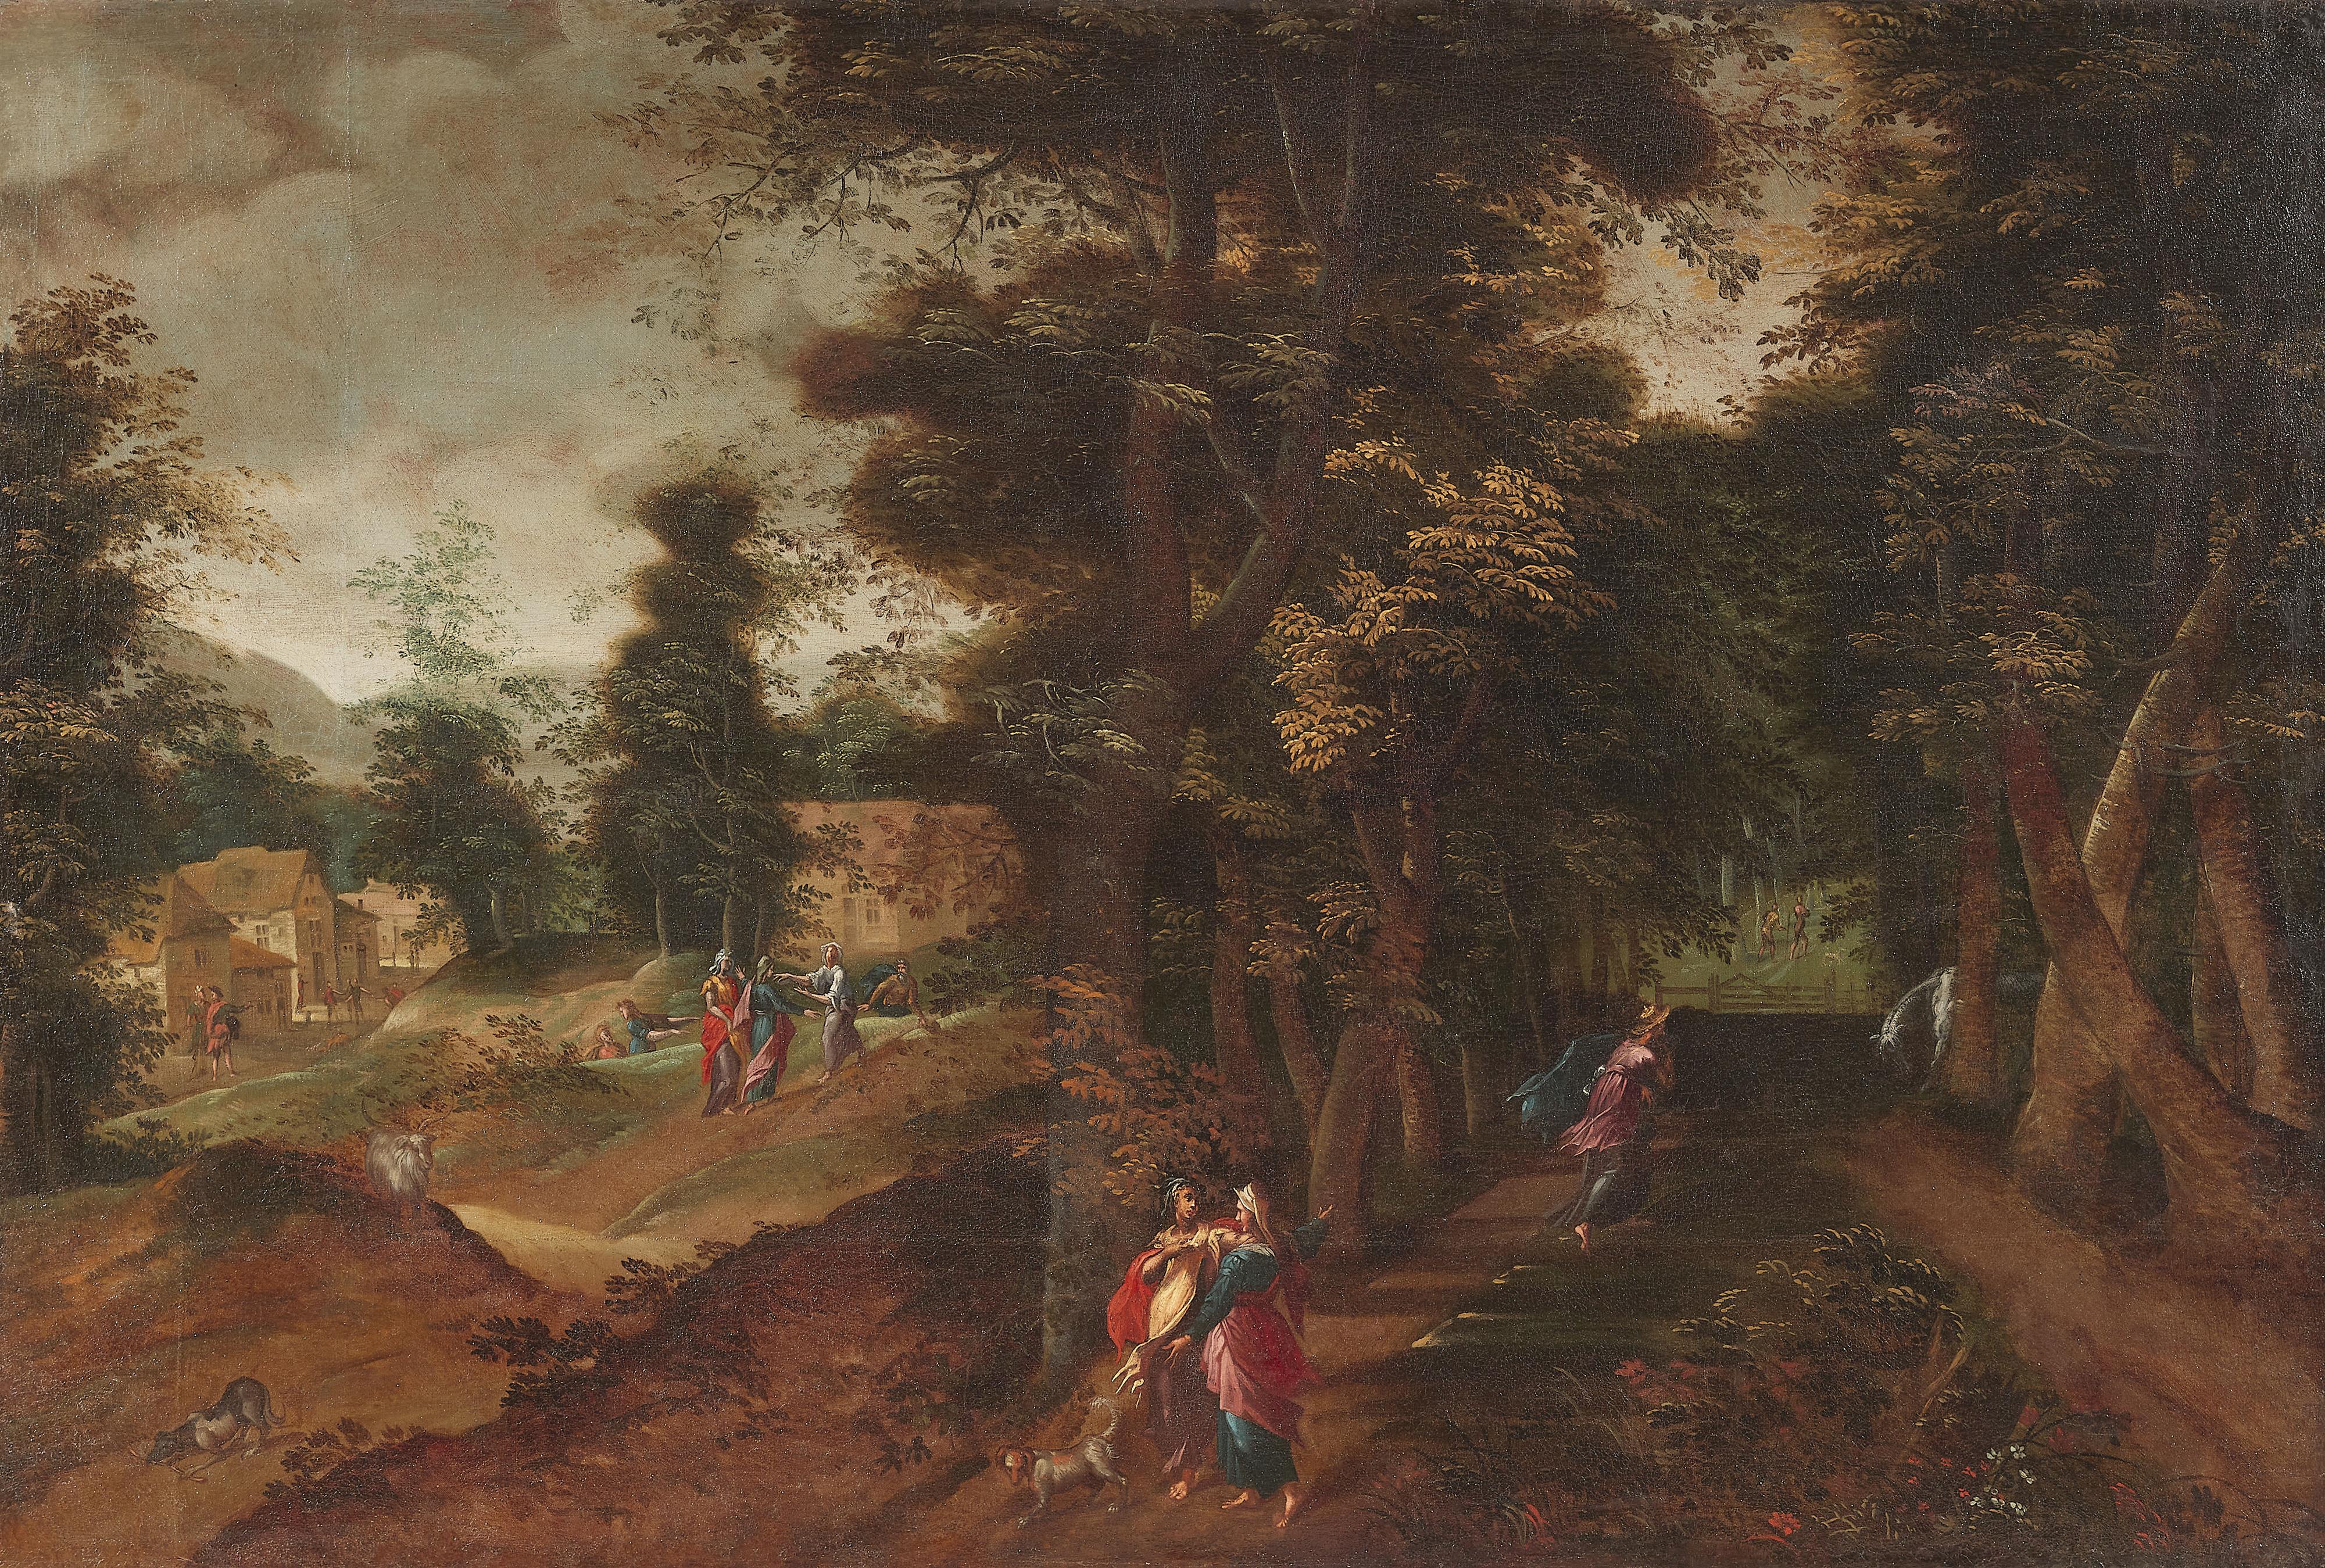 Abraham Bloemaert, attributed to - Wooded landscape with figures - image-1